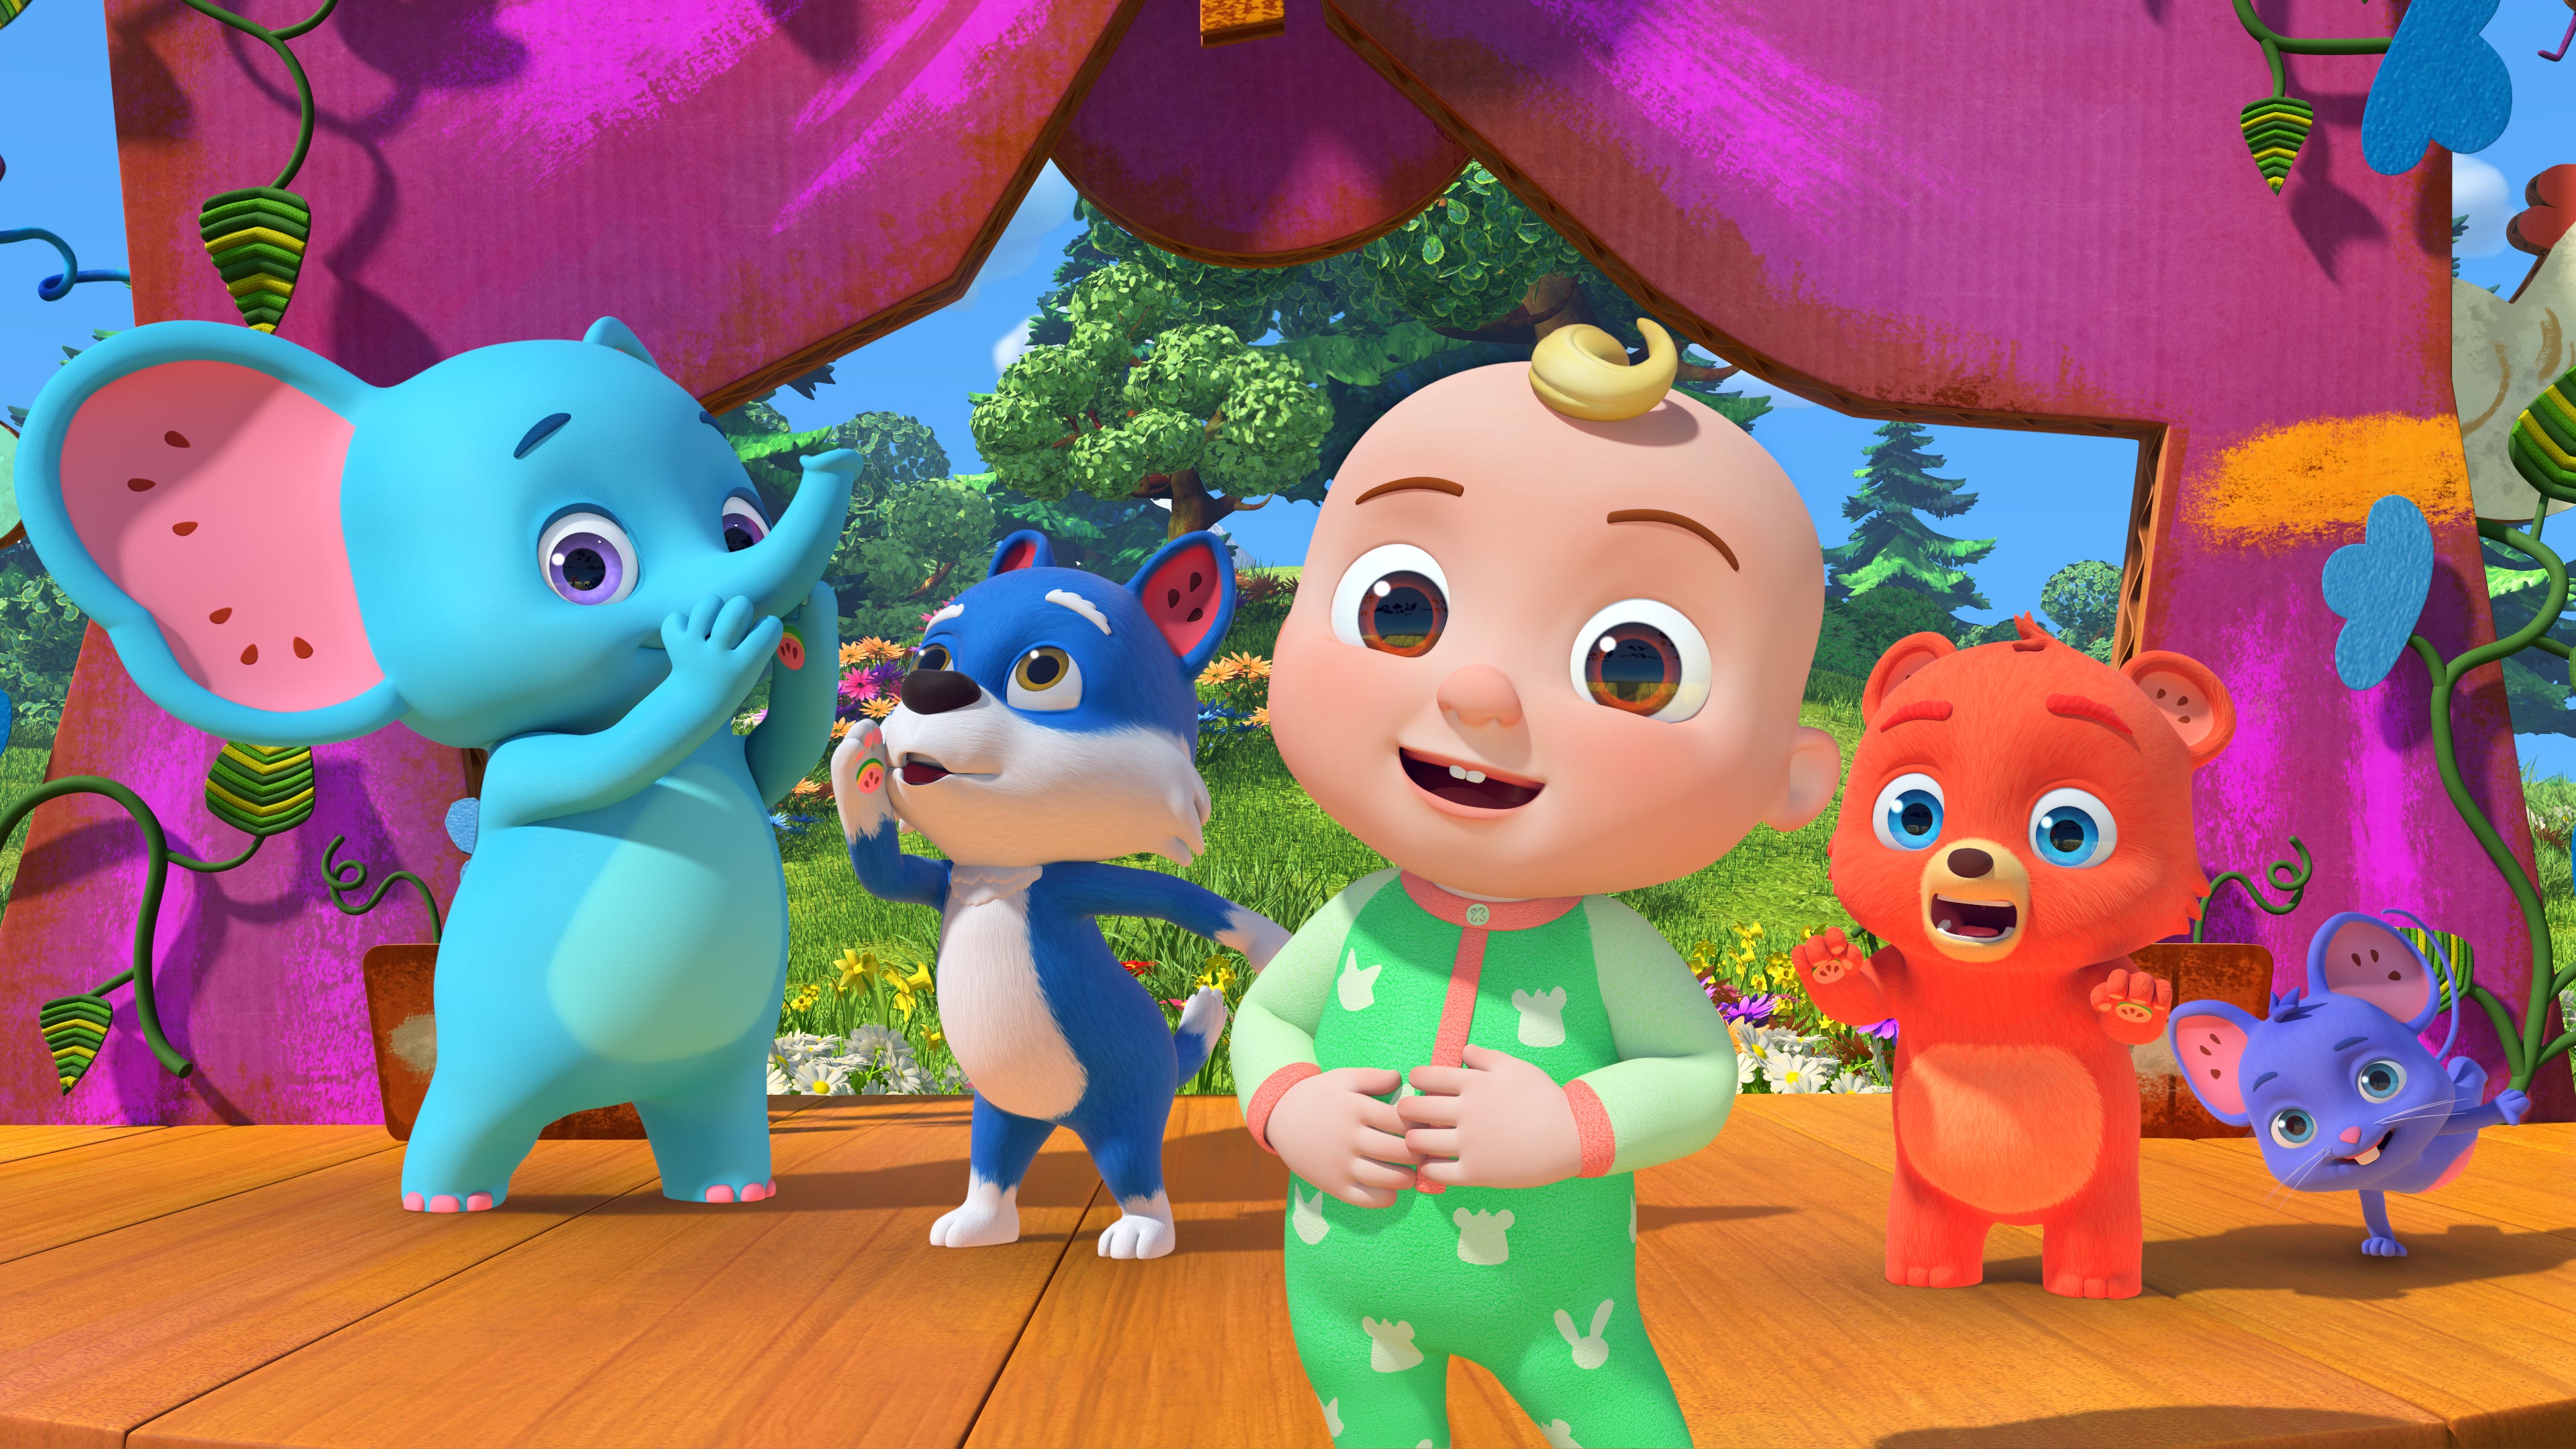 Exclusive: 'CoComelon' is getting spinoffs. Why the preschool show is streamed more than 'NCIS'